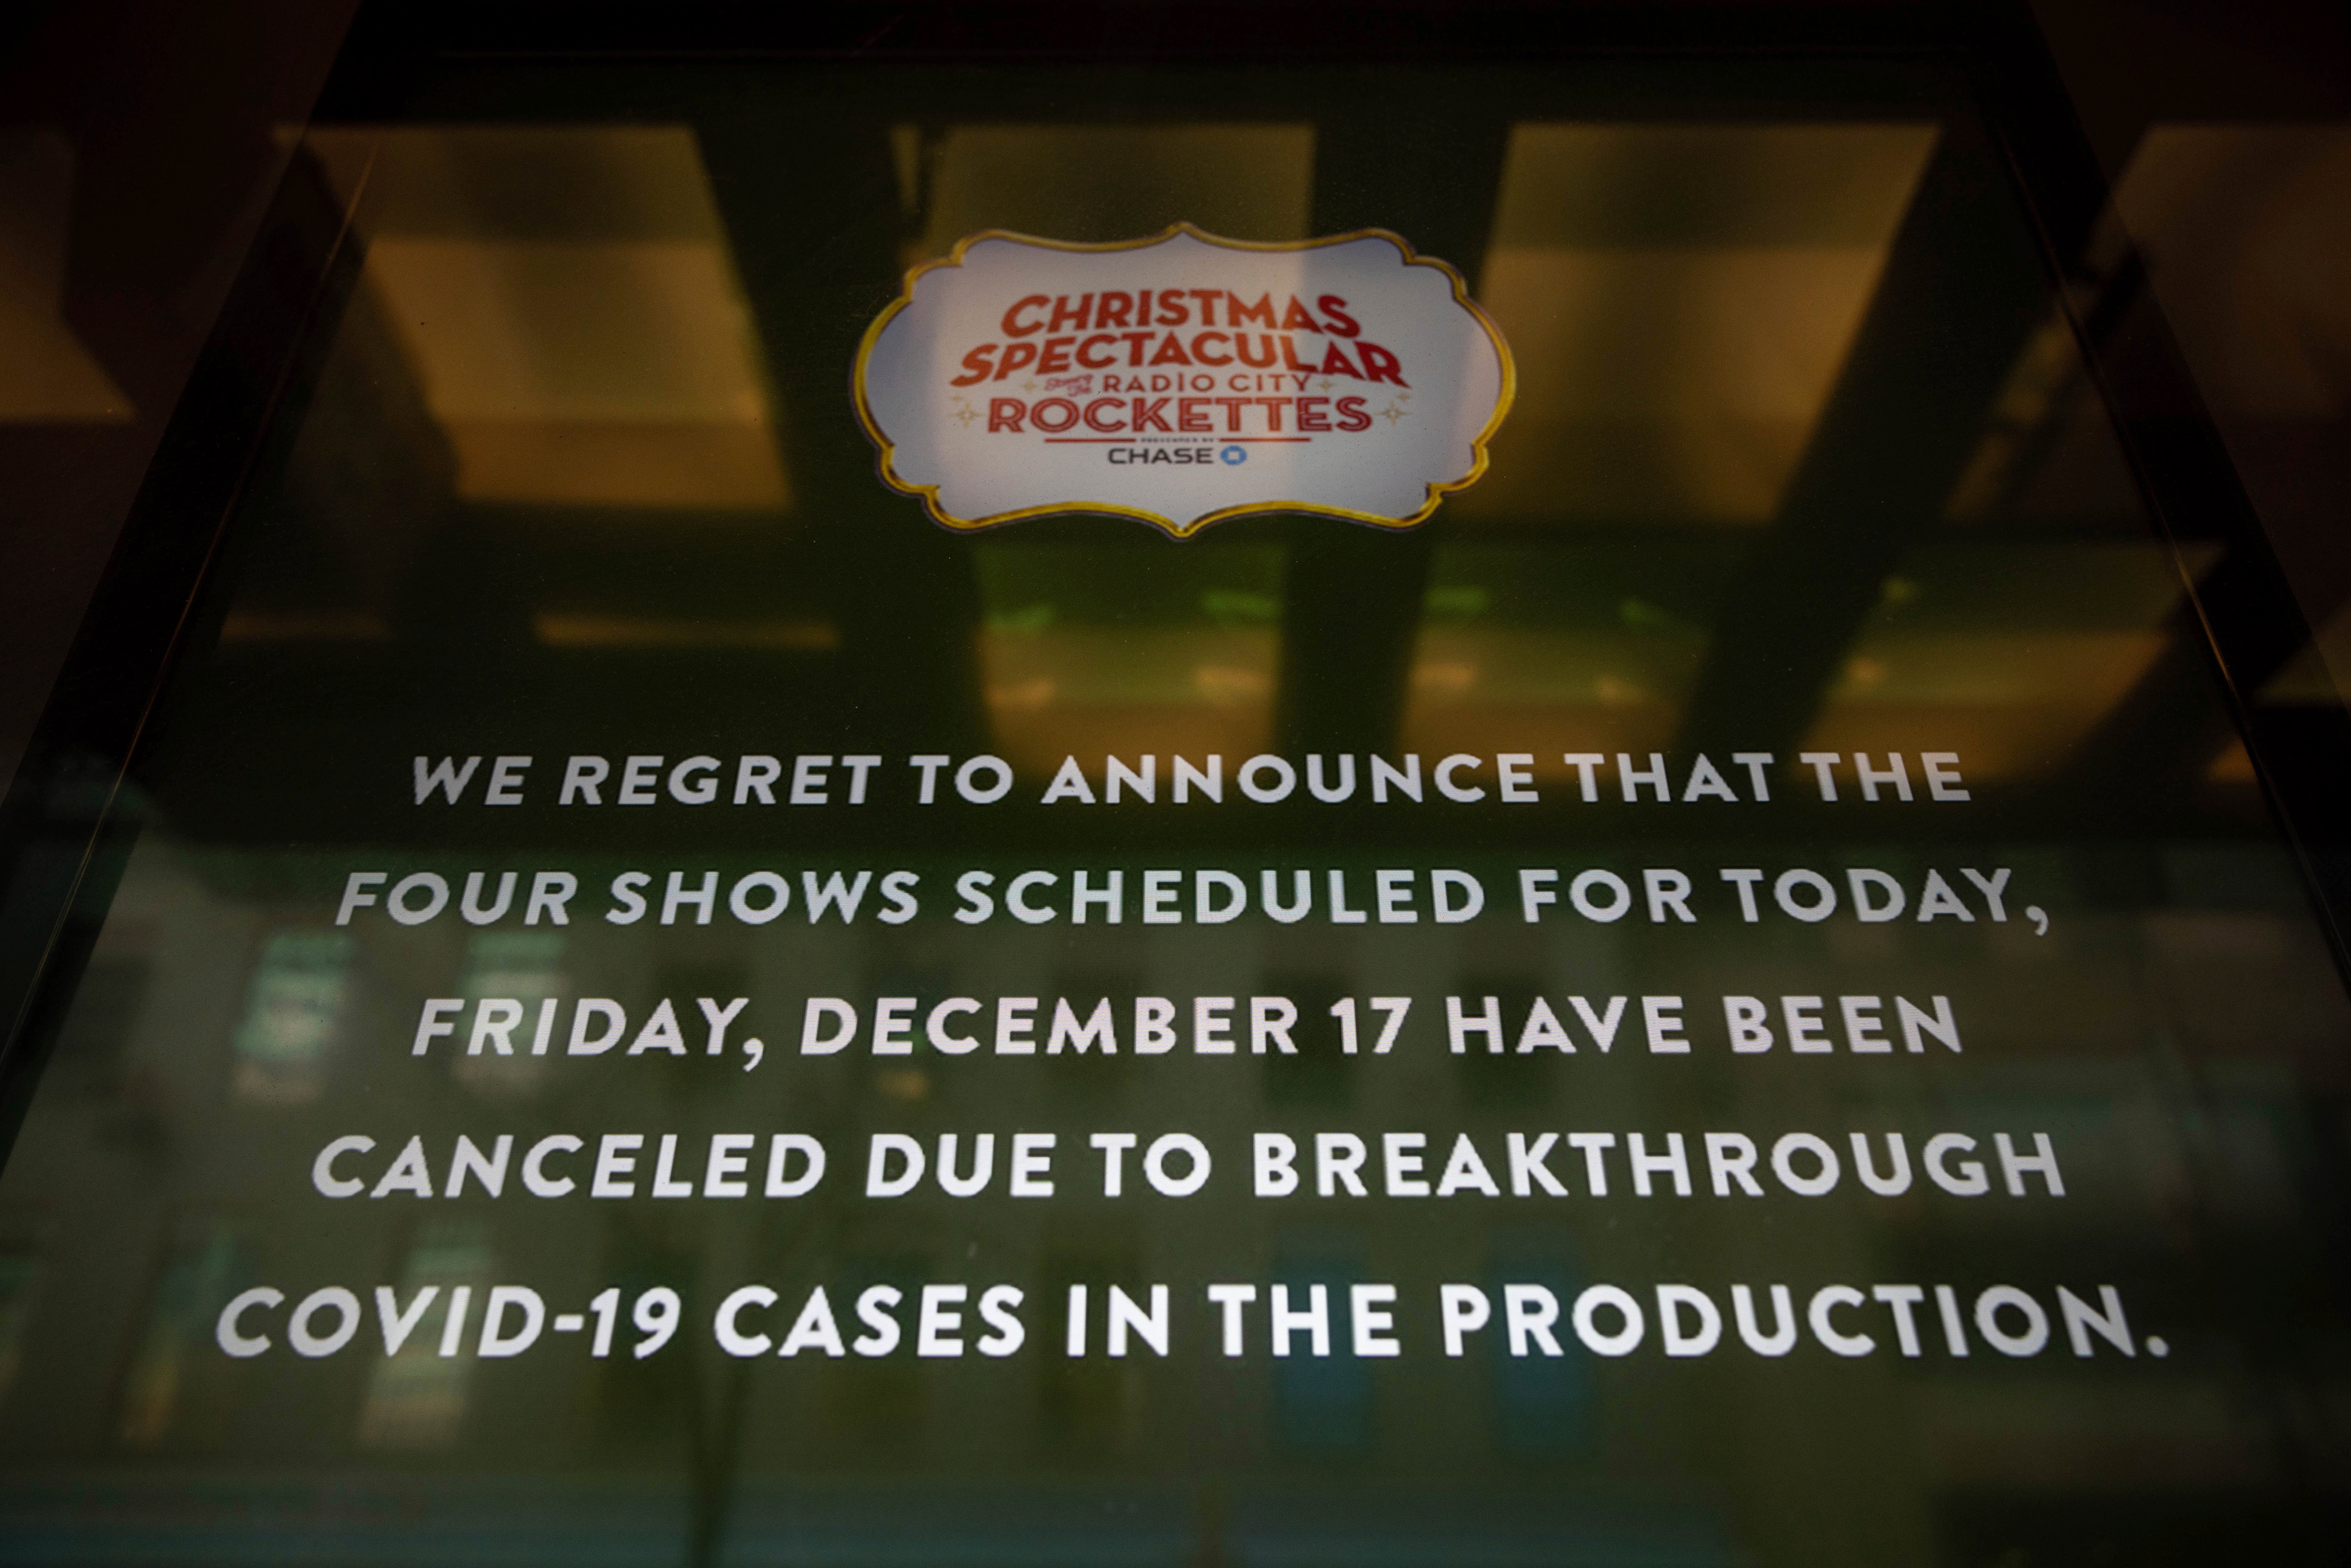 A screen announces cancellations of The Rockettes performance due to COVID-19 cases on December 17